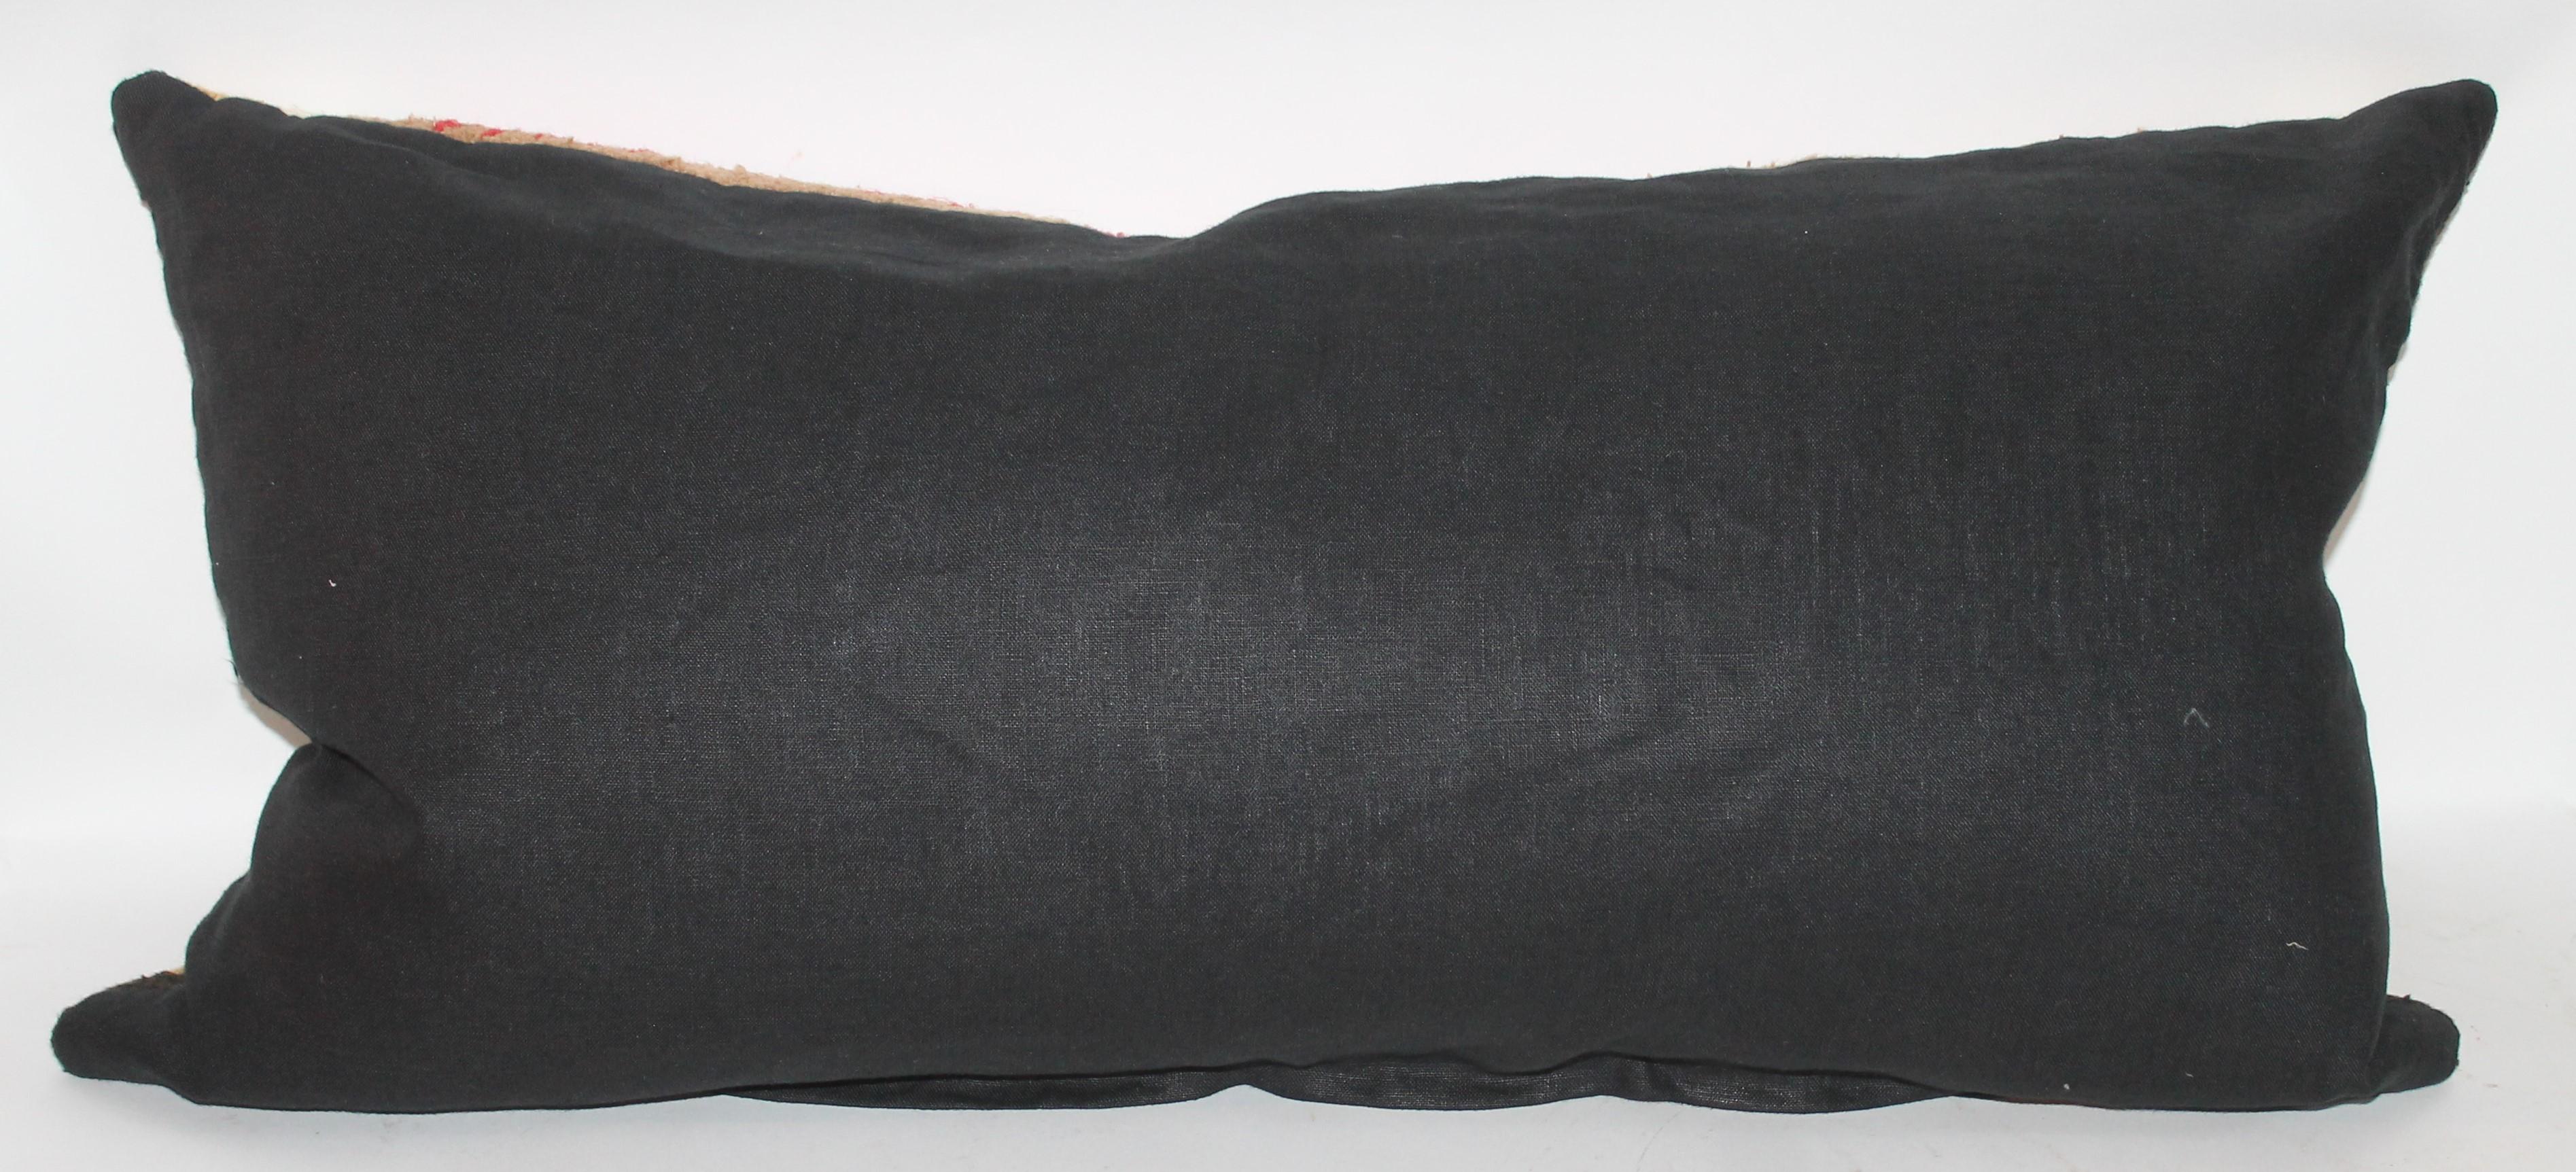 20th Century Navajo Indian Weaving Bolster Pillows, Collection of Five